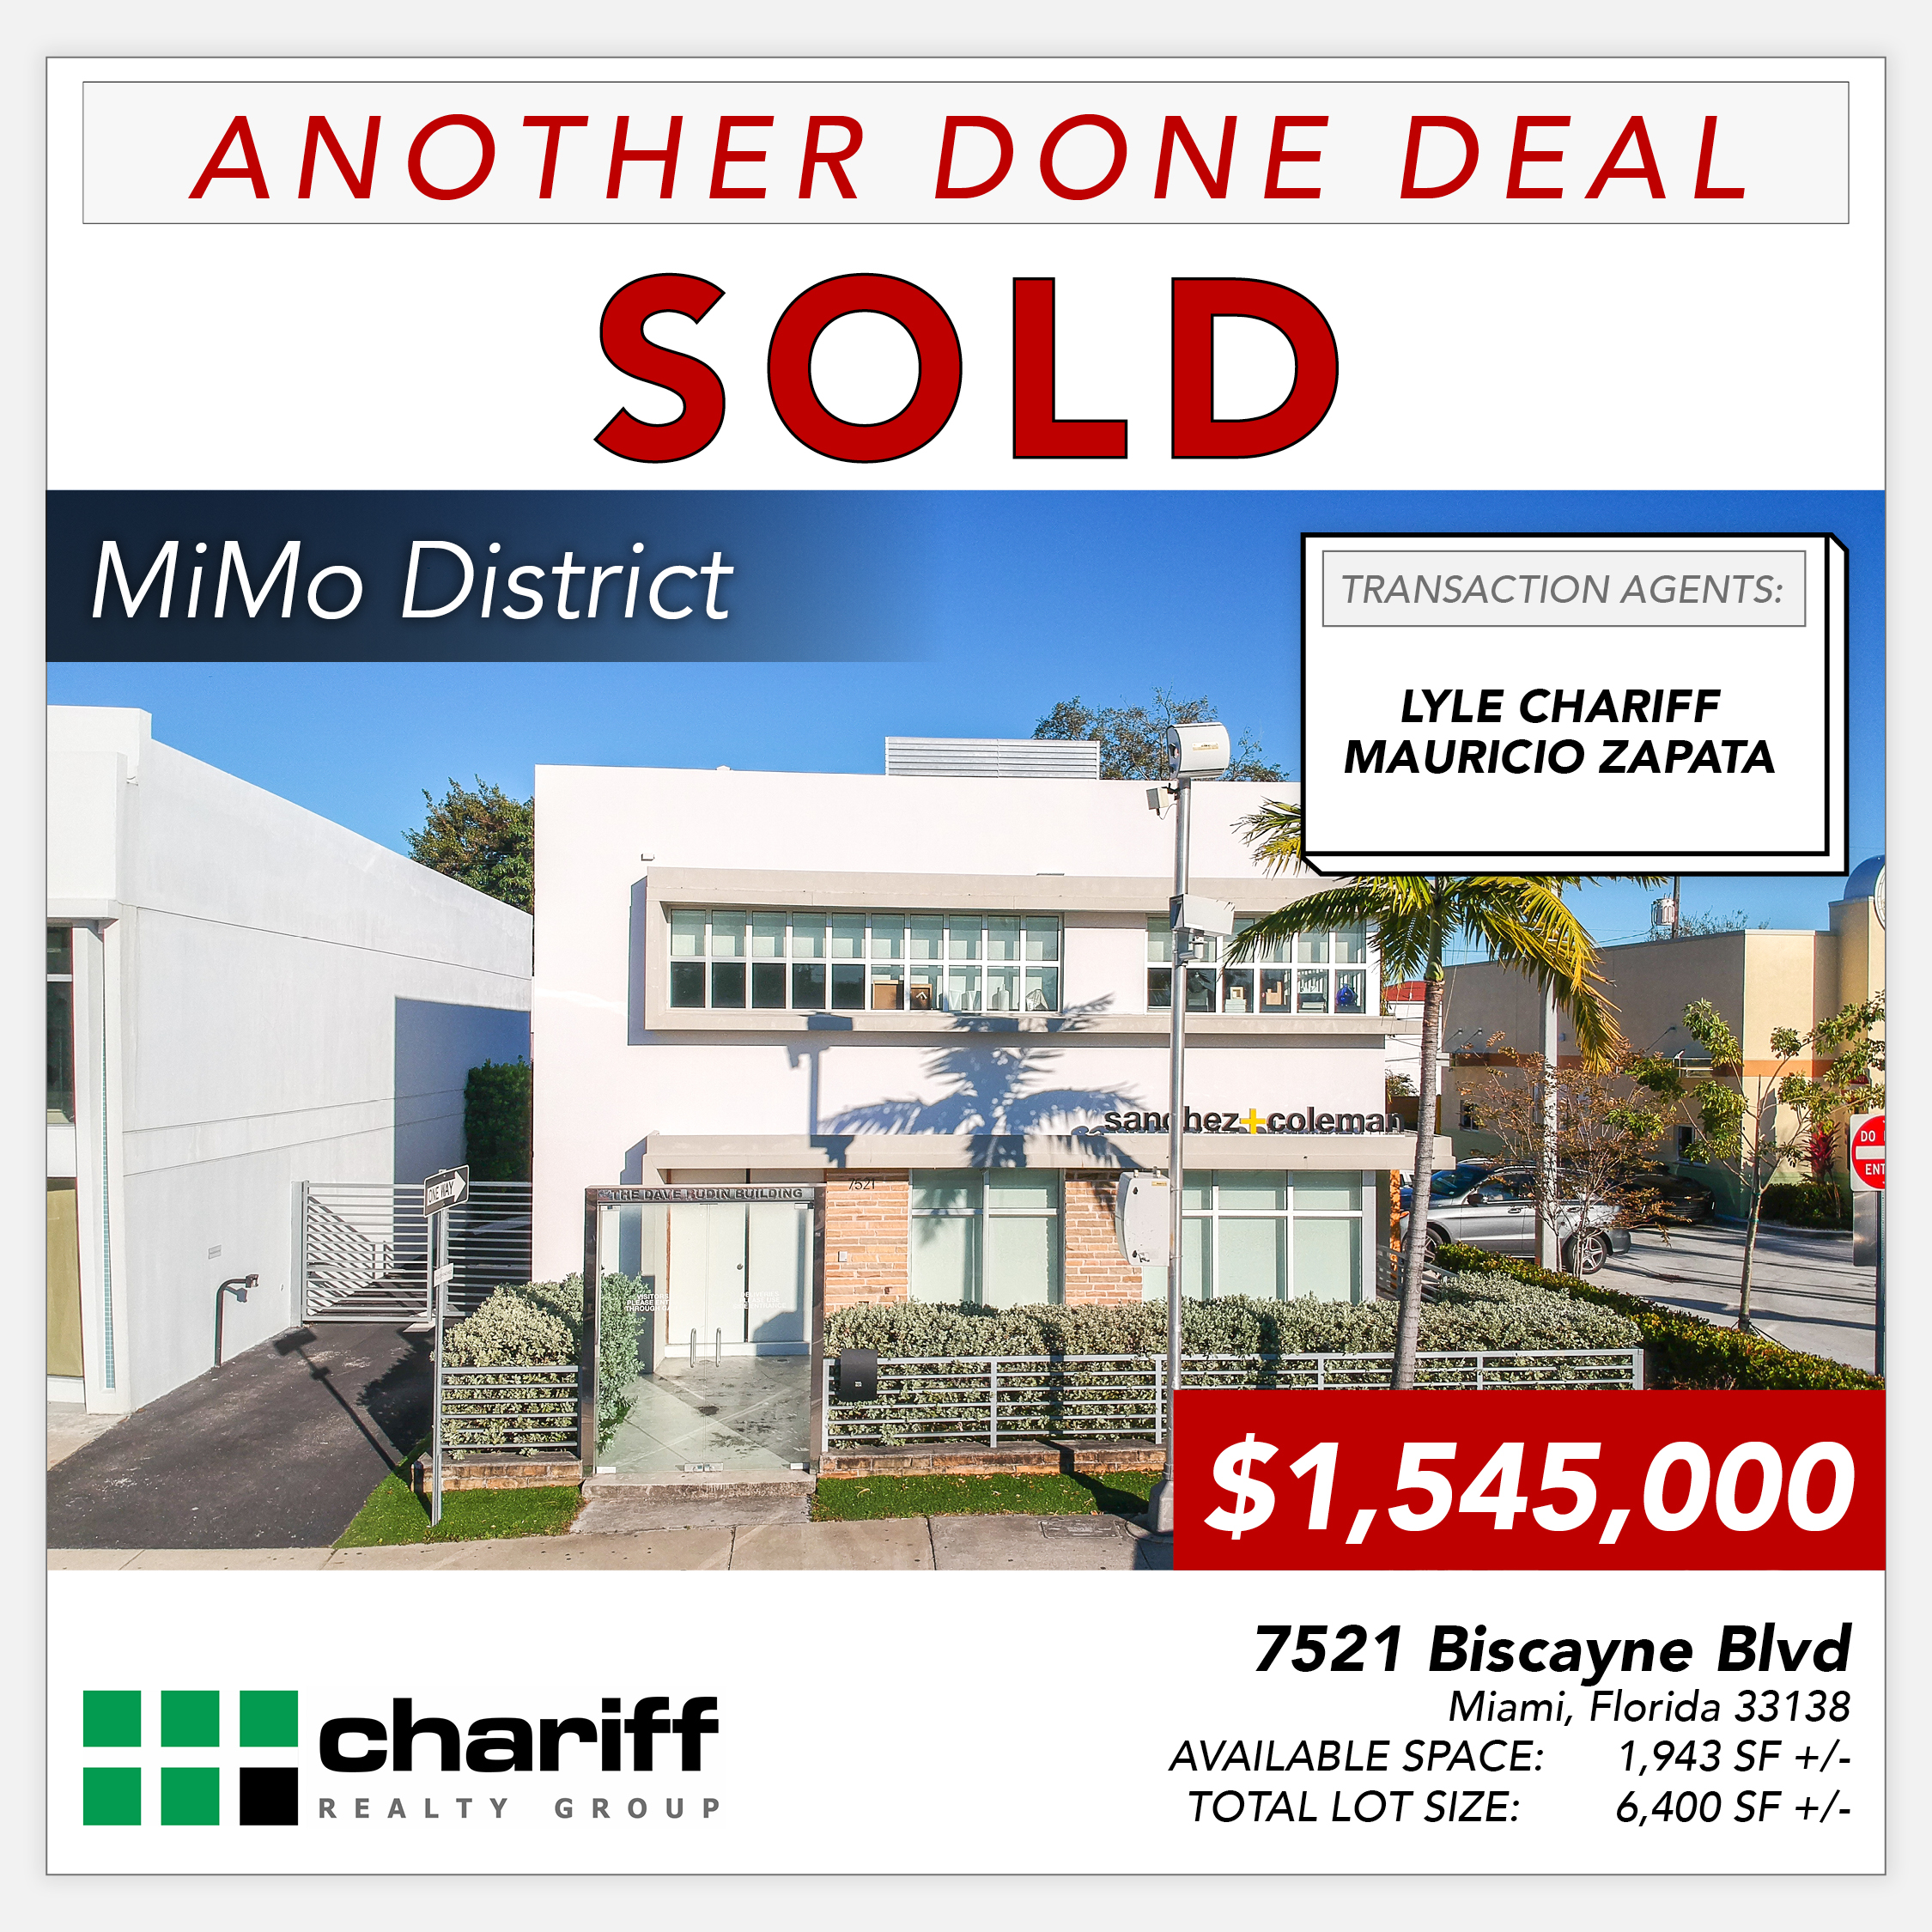 7521 Biscayne Blvd - Another Done Deal-Sold-MiMo District - Miami-Florida -33138 -Chariff Realty Group